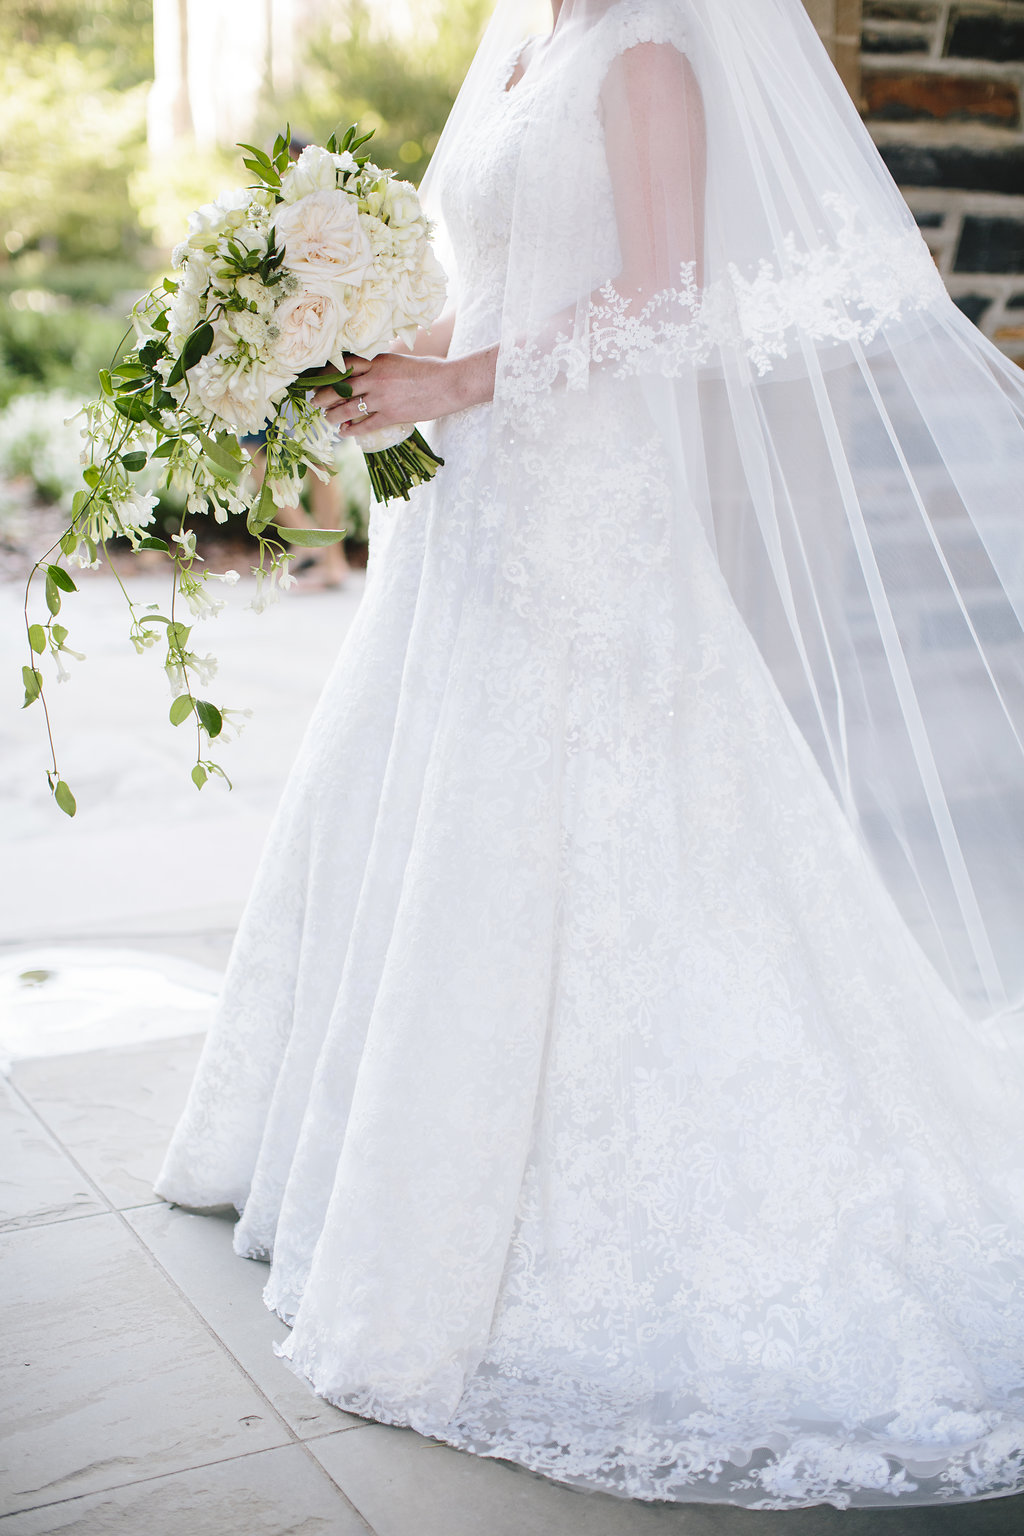 Bride in classic lace wedding gown with veil